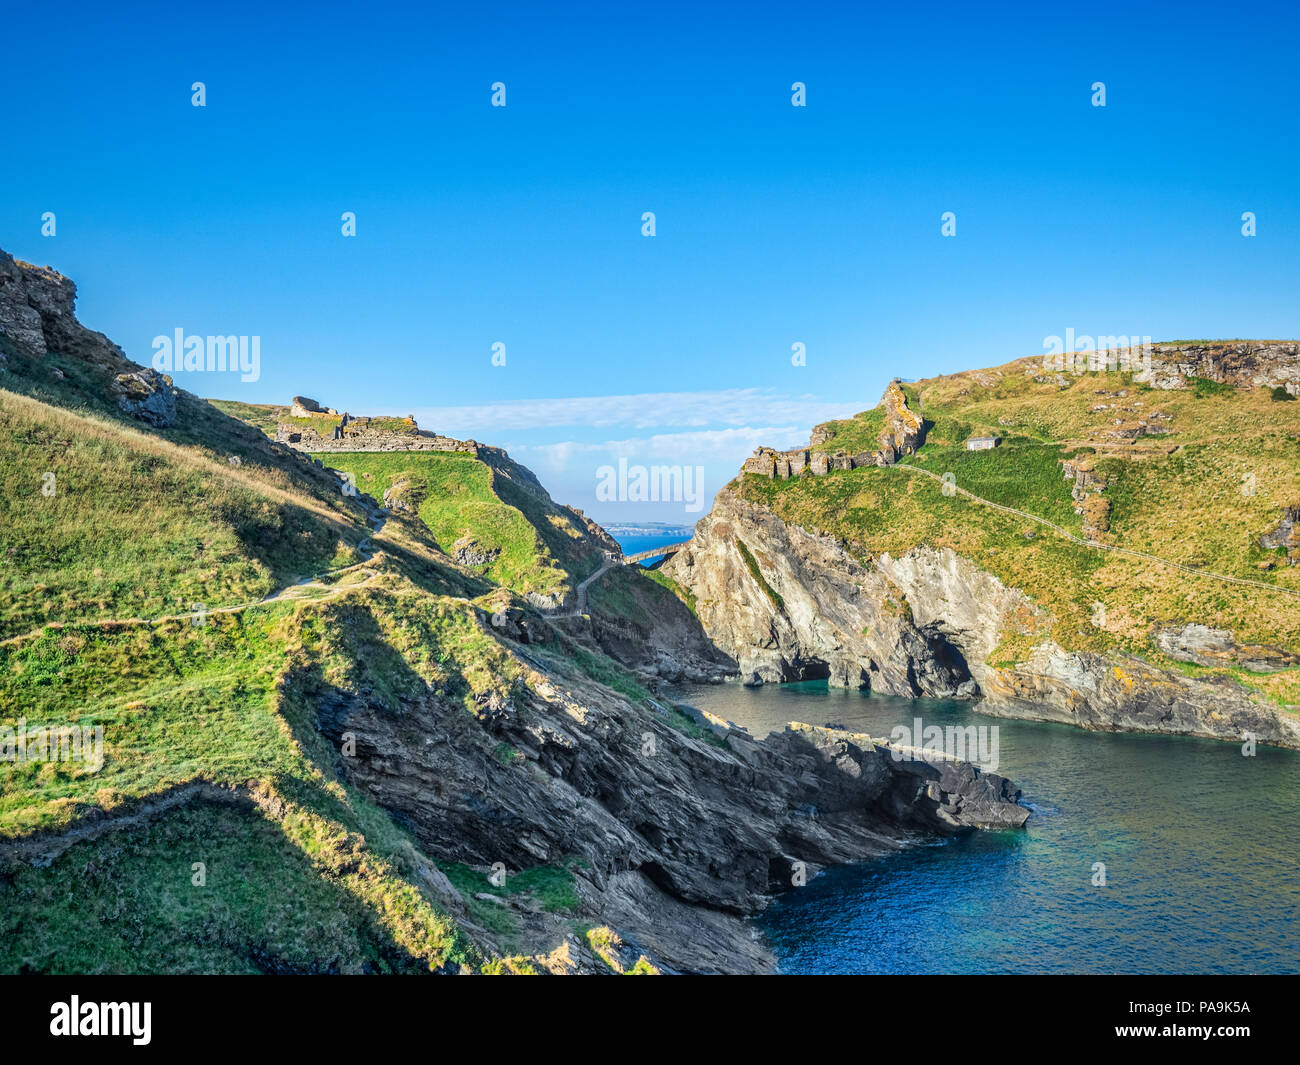 The ruins of Tintagel Castle, Cornwall, England, UK, on the mainland and The Island, seen from the South West Coast Path. Stock Photo